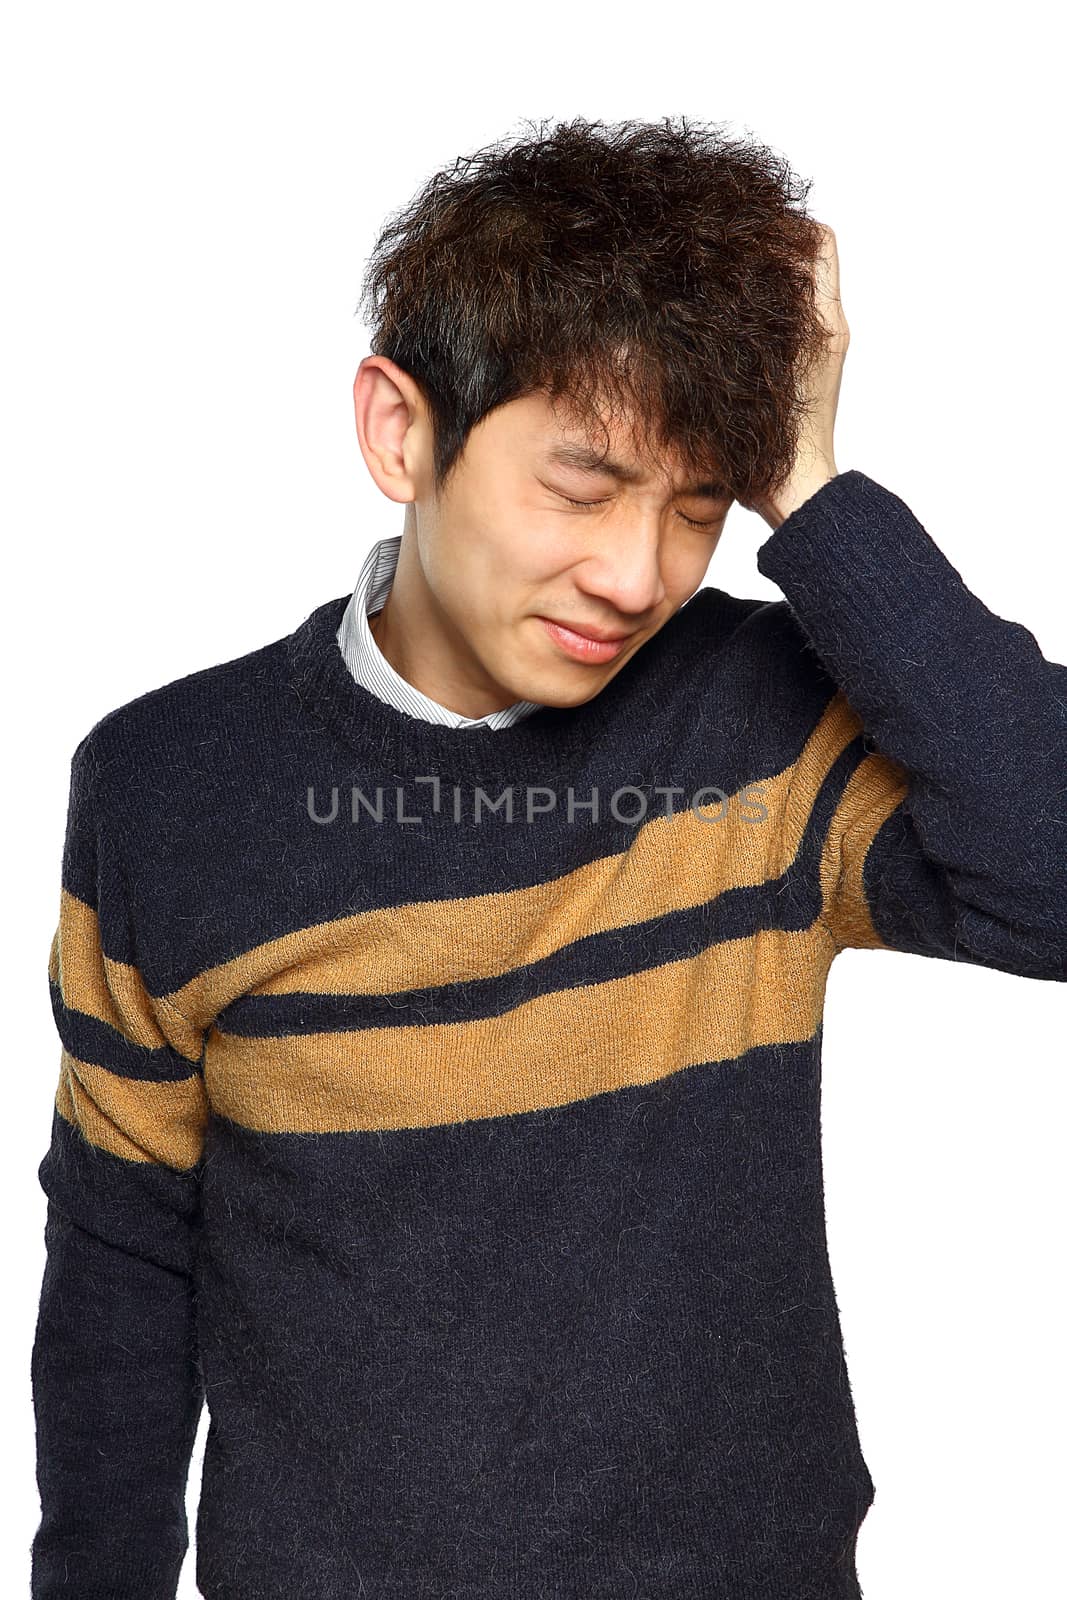 Closeup portrait, stressed young asian man, hands on head with bad headache, isolated background on white. Negative human emotion facial expression feelings.